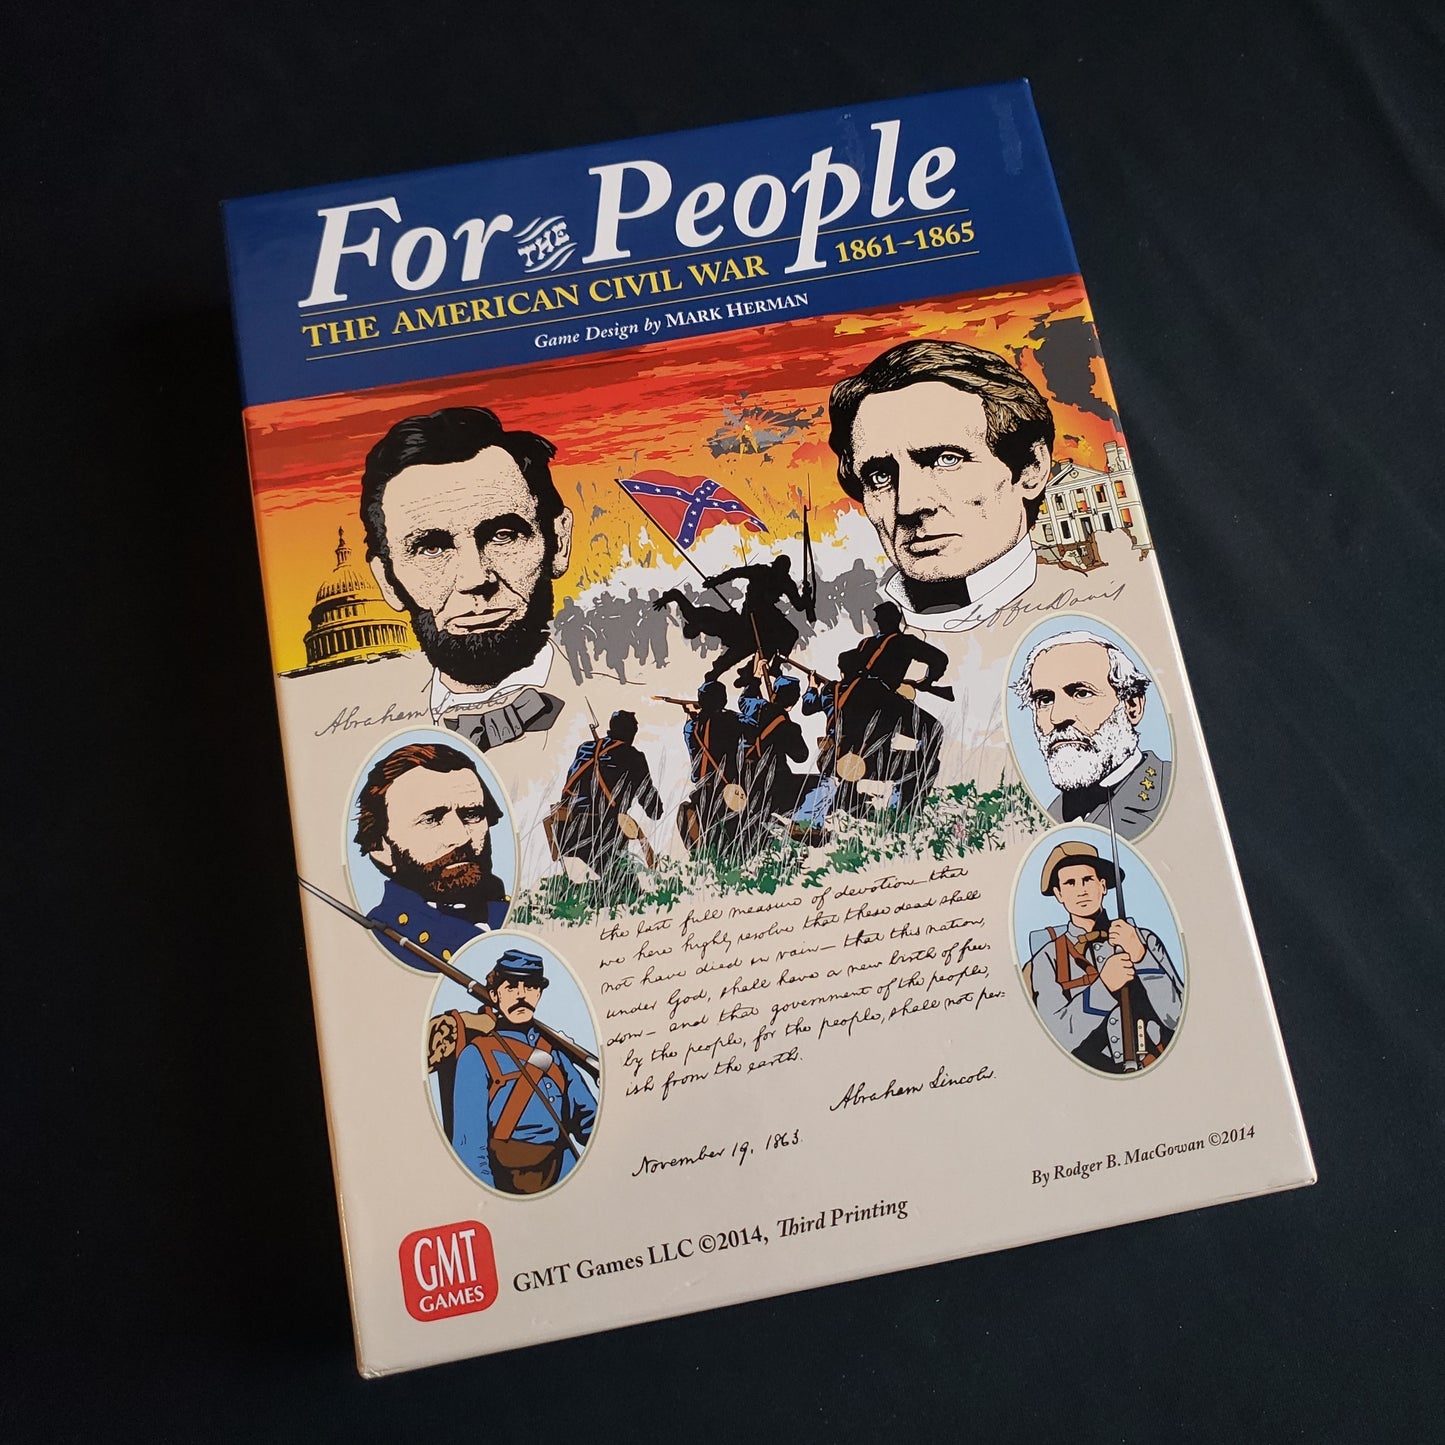 Image shows the front cover of the box of the For The People board game